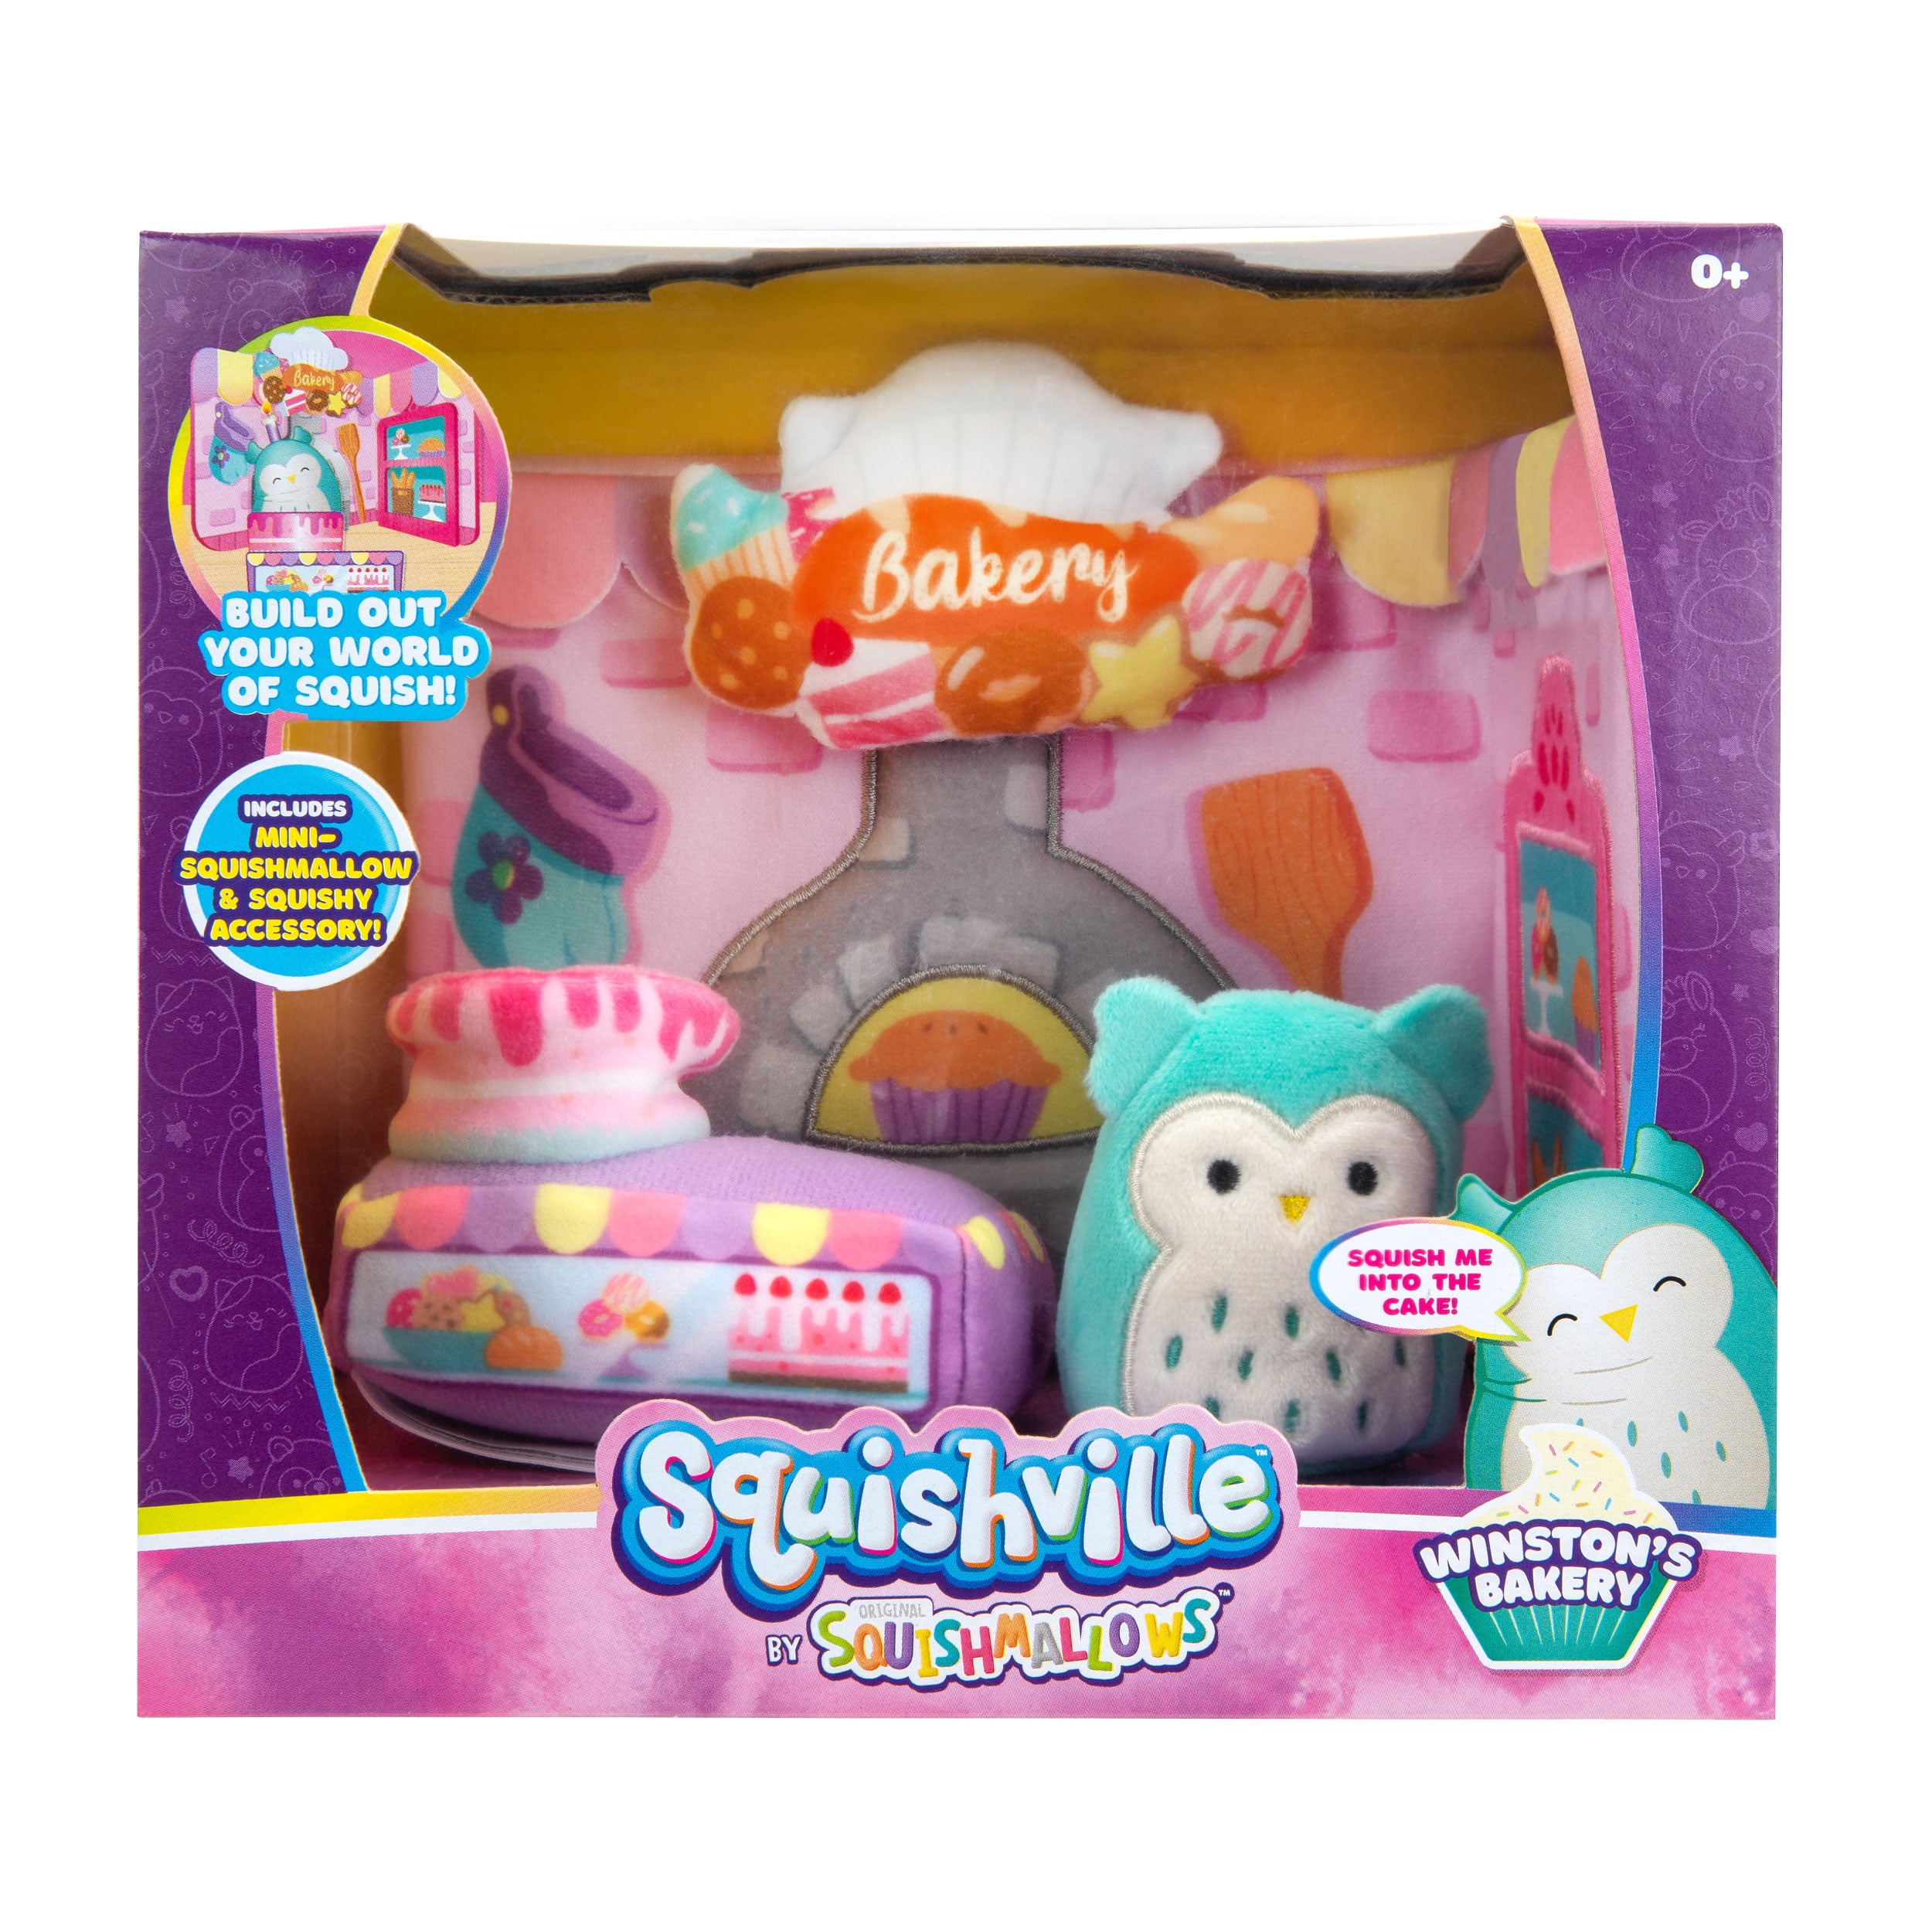 Squishville by Squishmallows Play Sets with 1 Plush Character and 2 Accessories 